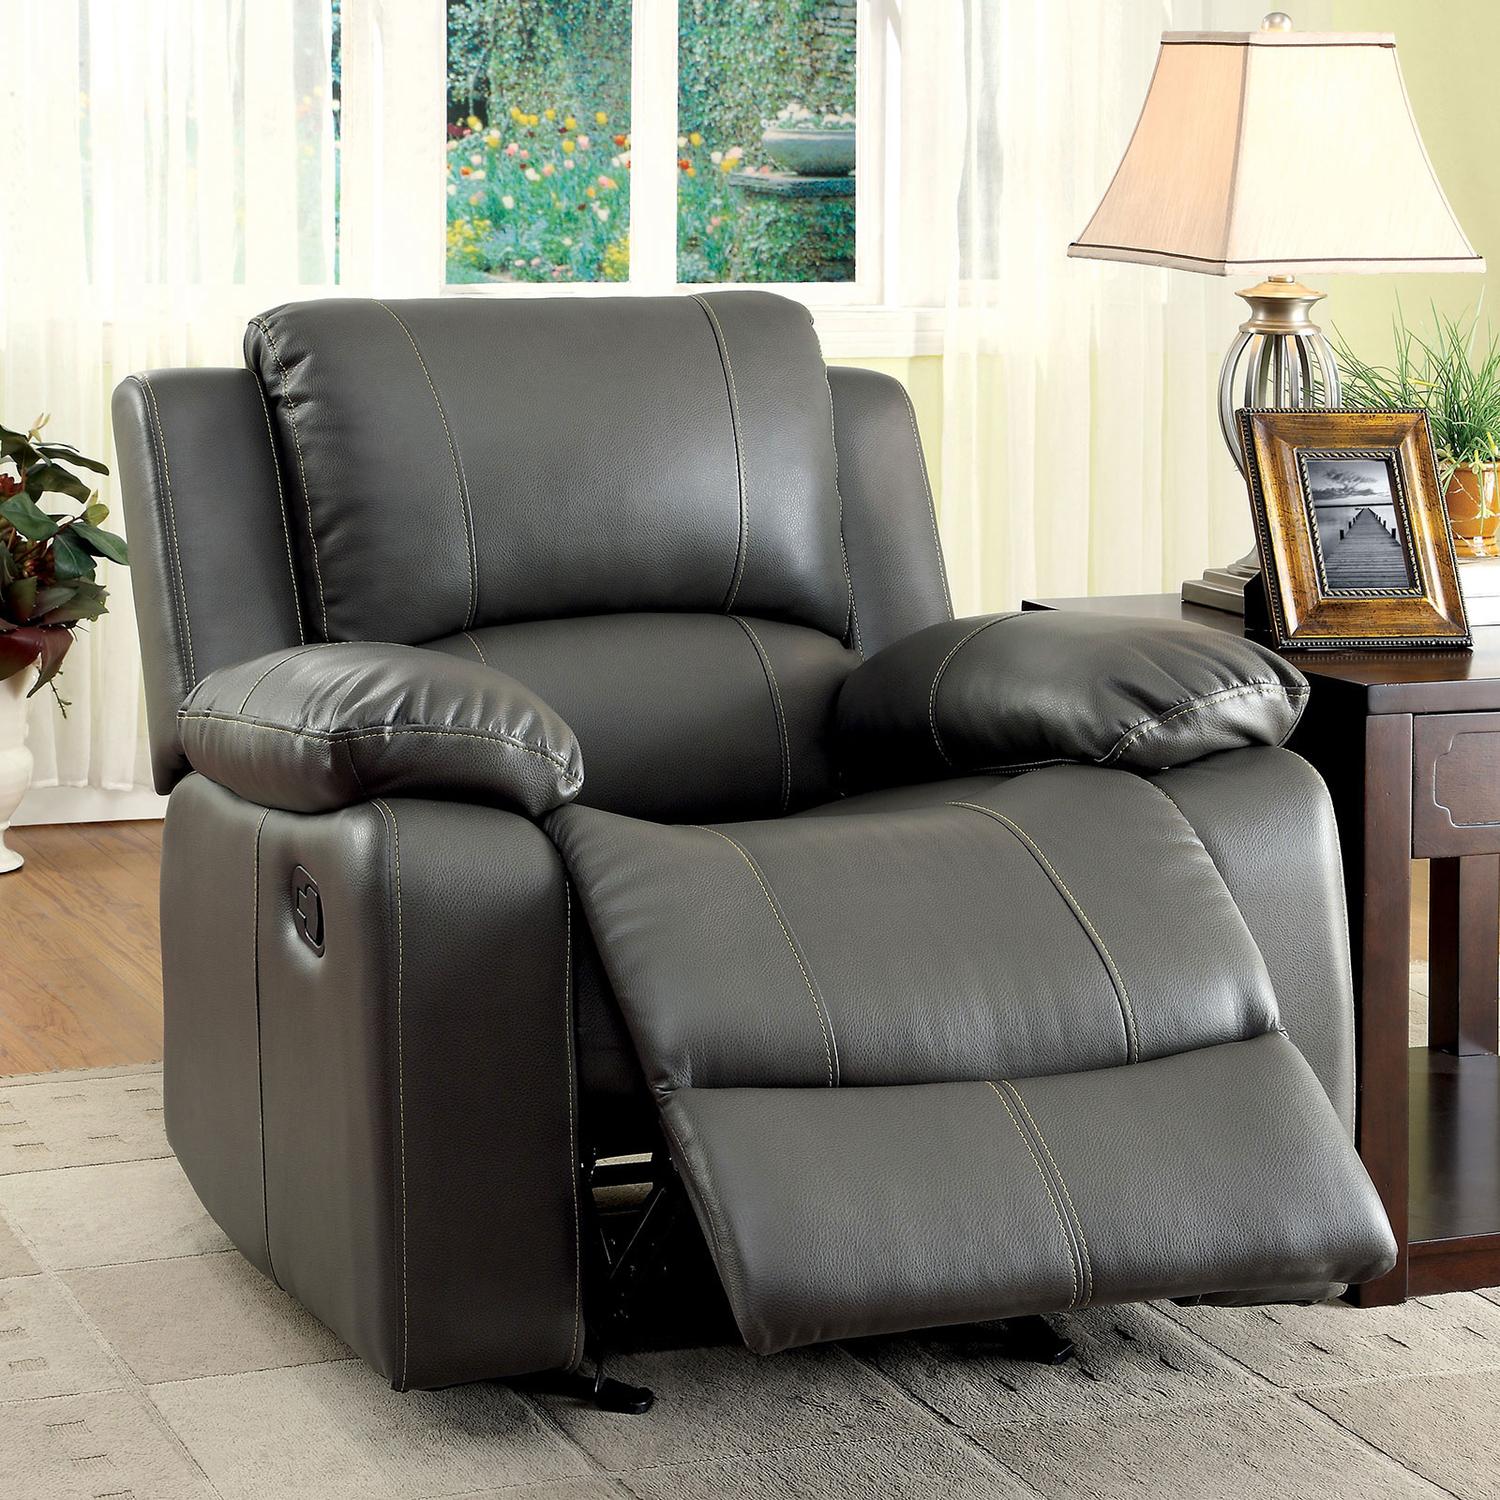 Transitional Recliner CM6326-CH Sarles CM6326-CH in Gray Bonded Leather